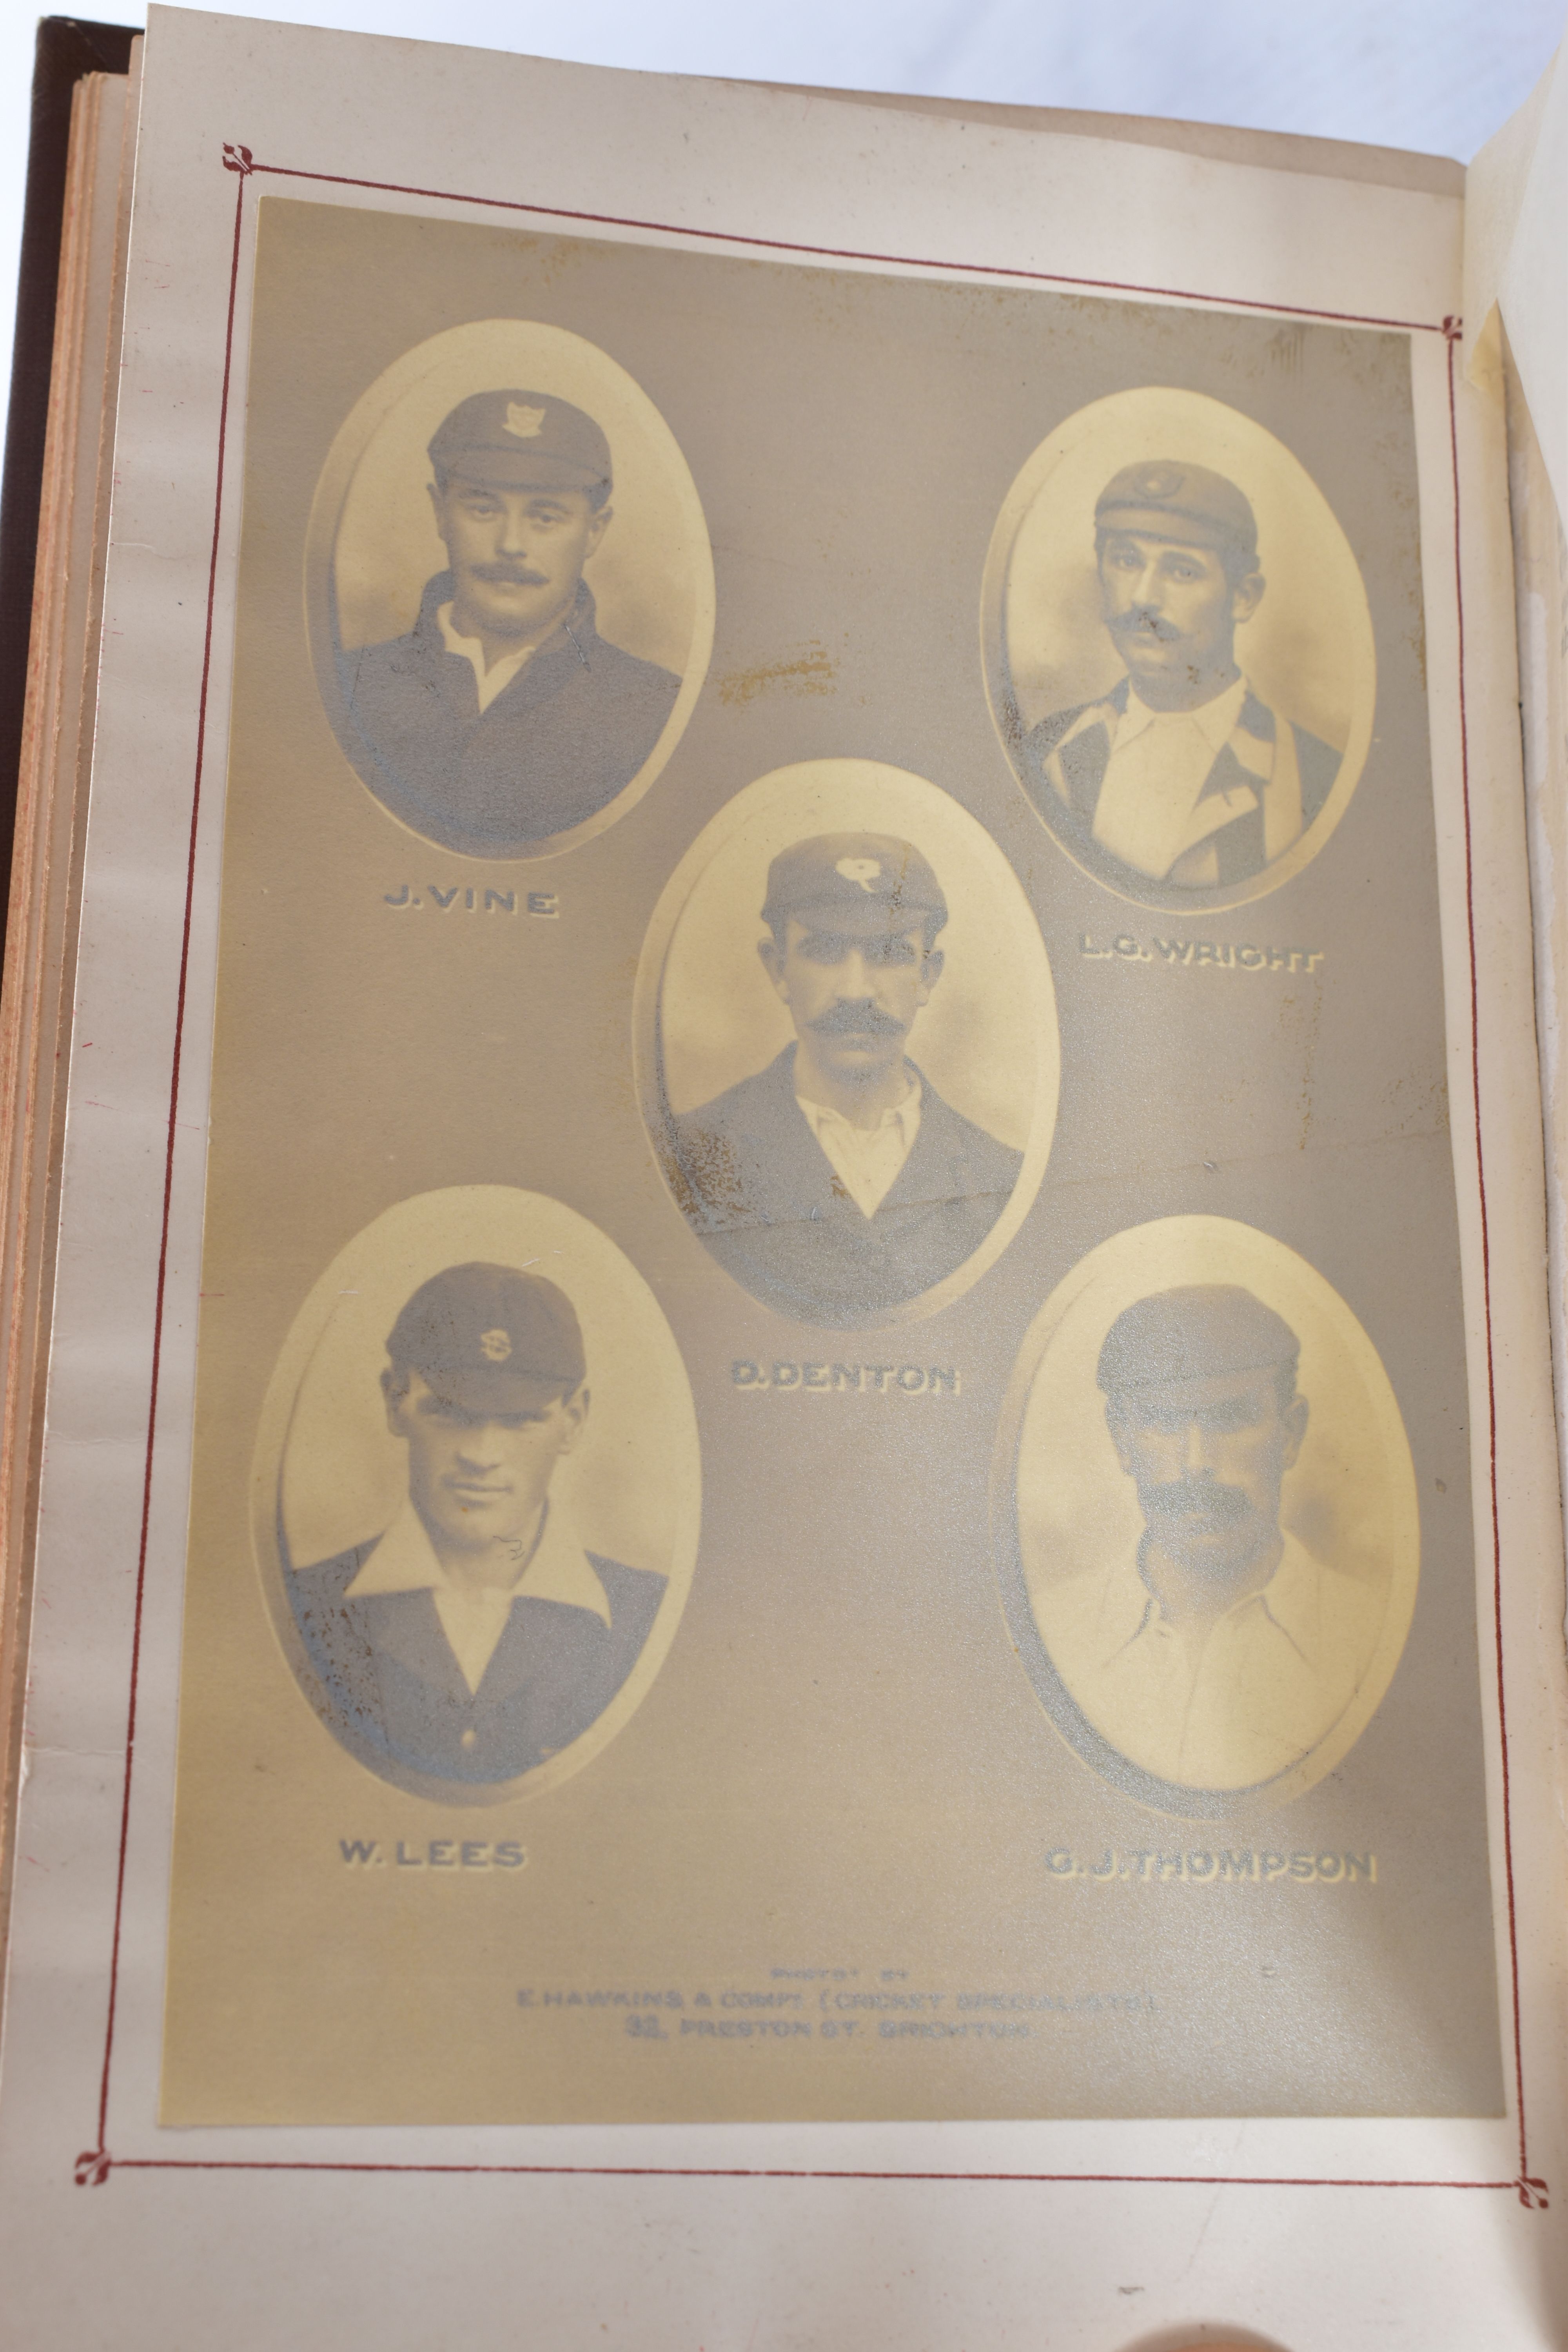 WISDEN; John Wisden's Cricketers' Almanack for 1906, 43rd edition, photographic plate intact, - Image 4 of 7